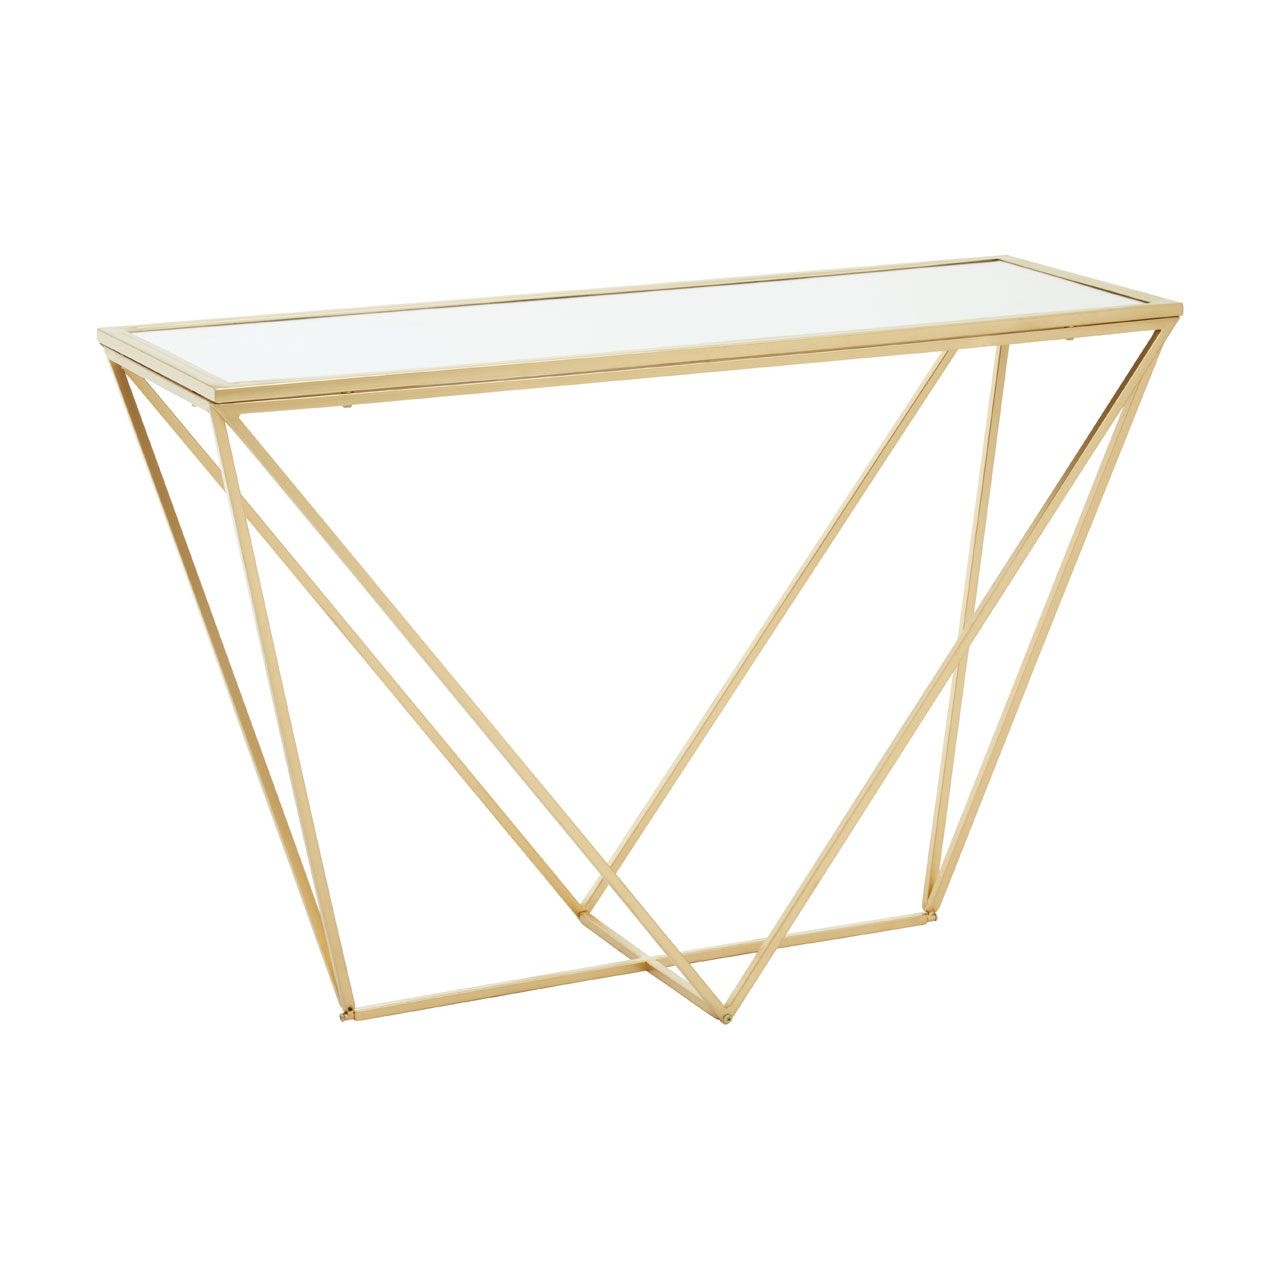 Farran Mirrored Console Table With Gold Triangular Metal Base